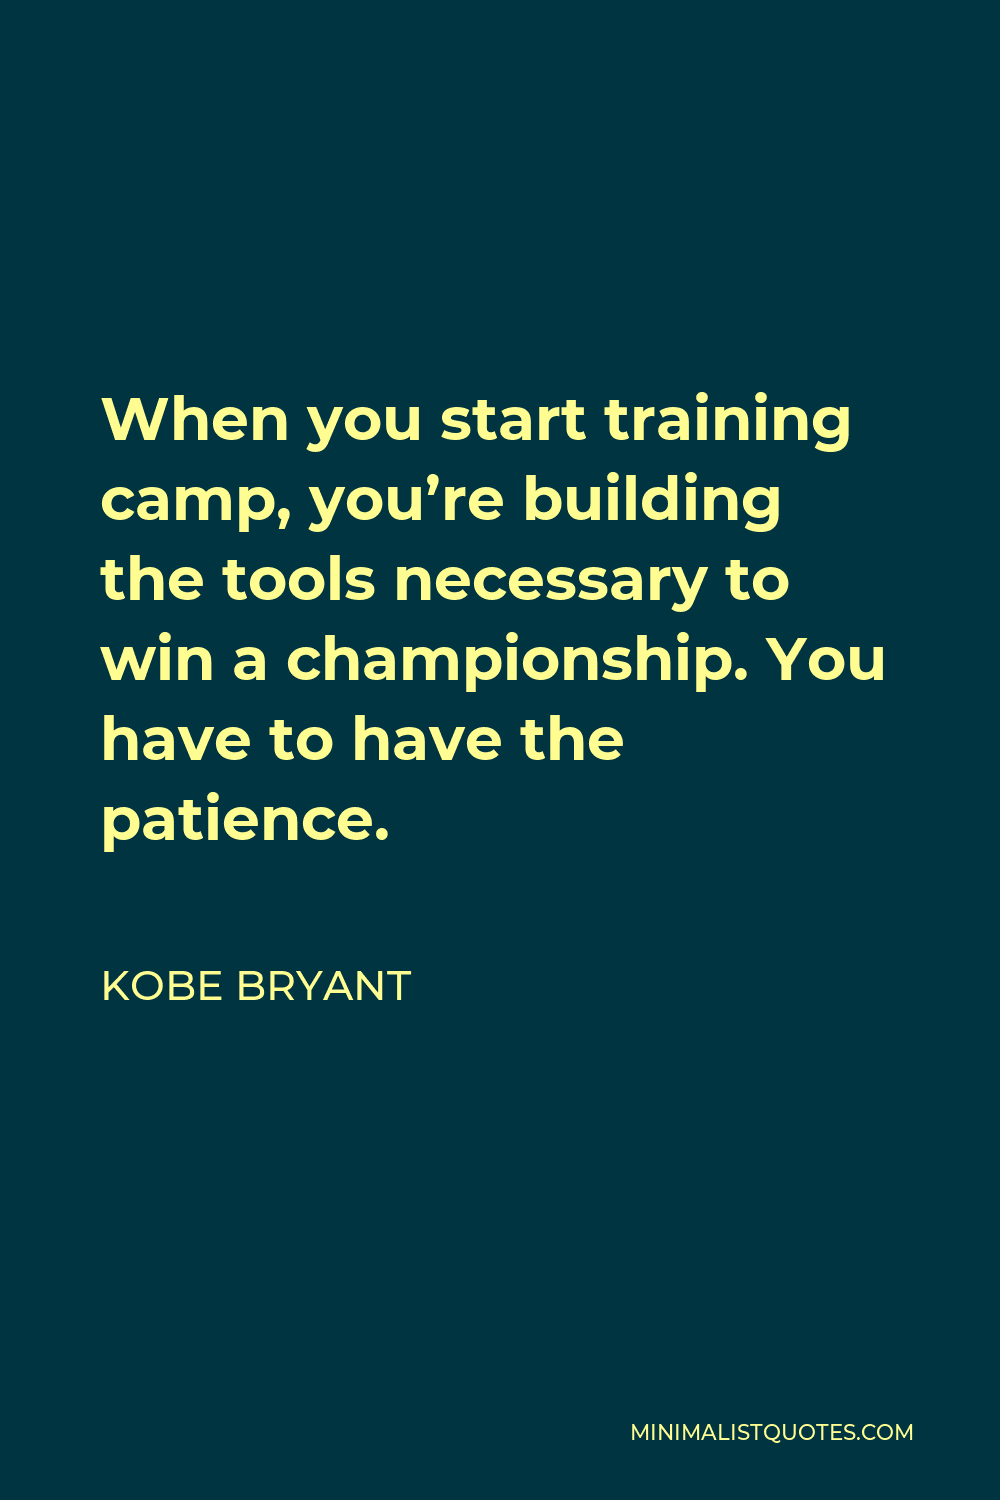 Kobe Bryant Quote - When you start training camp, you’re building the tools necessary to win a championship. You have to have the patience.